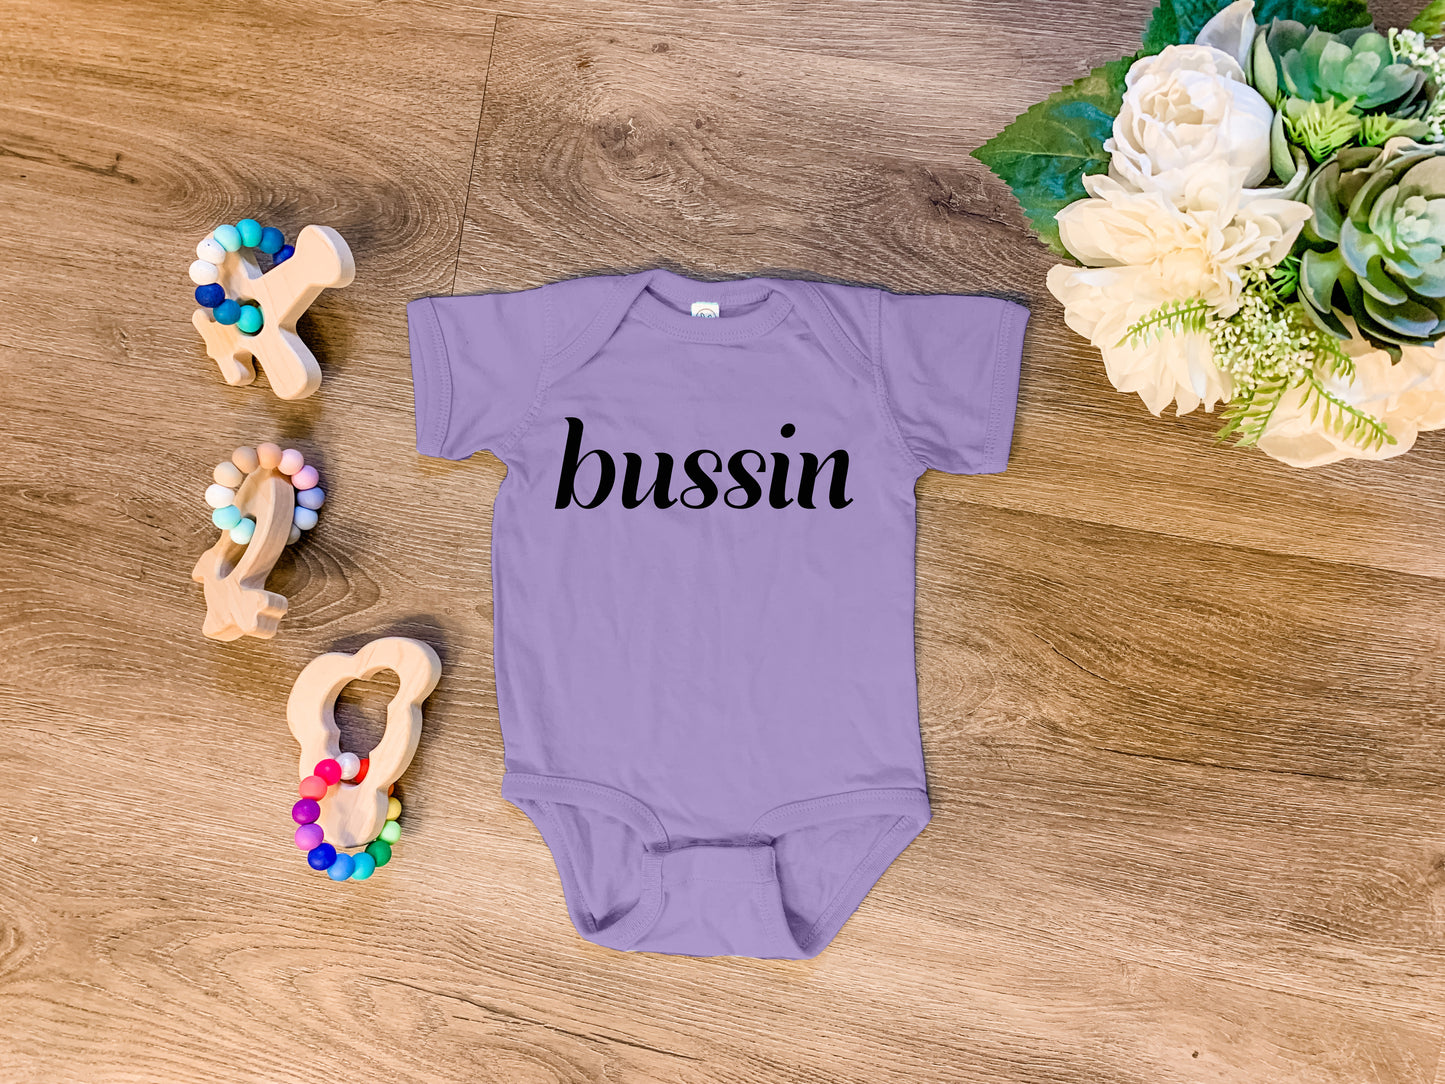 Bussin - Onesie - Heather Gray, Chill, or Lavender